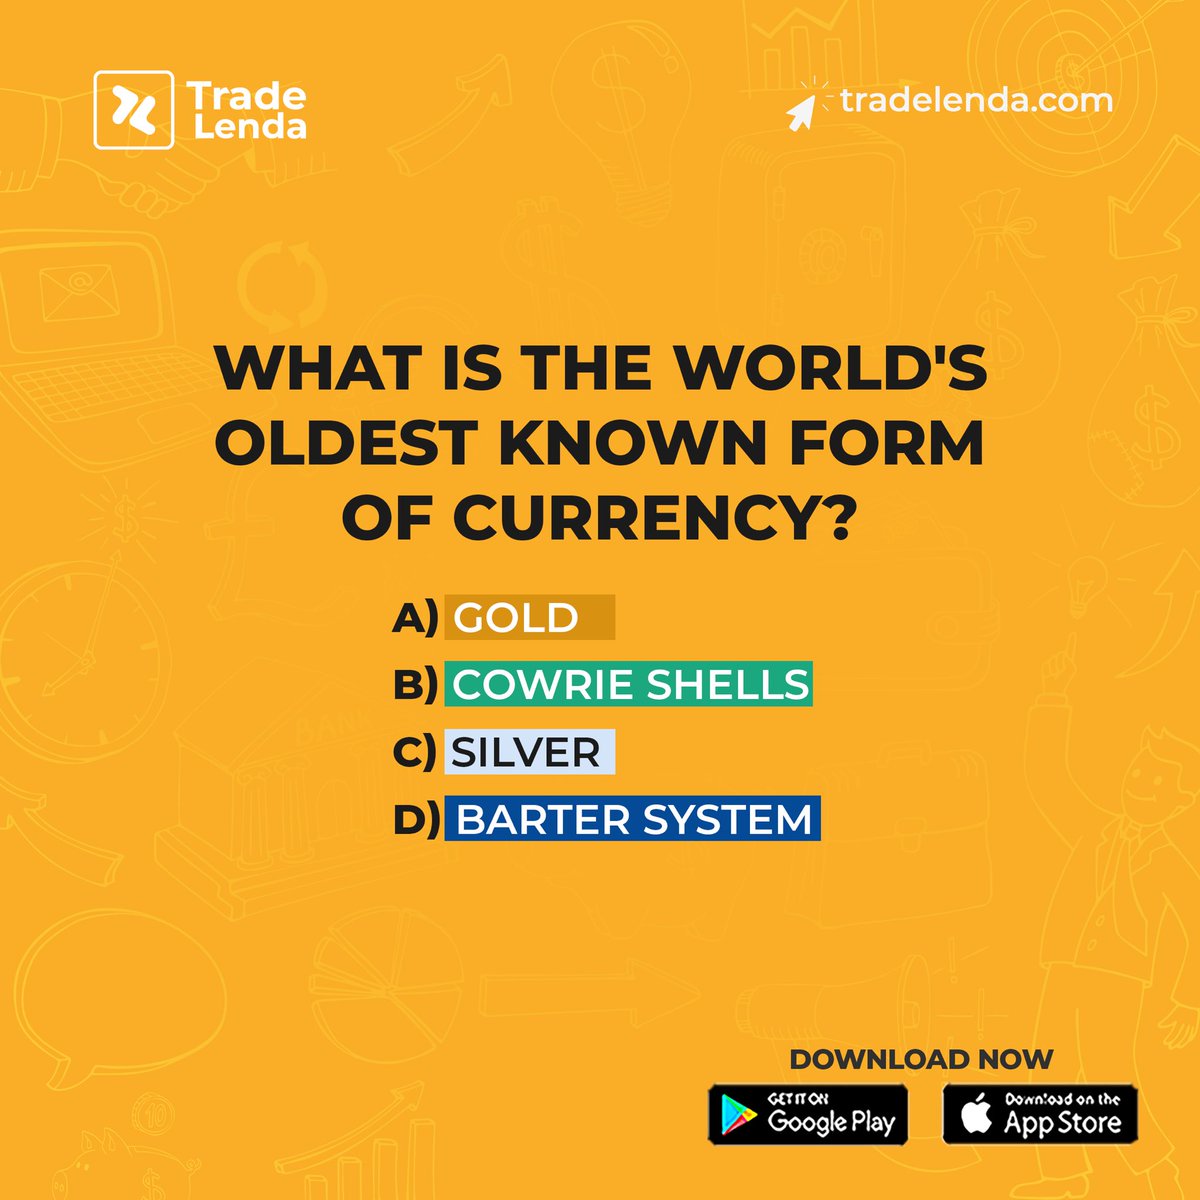 Did you know that the oldest form of currency dates back thousands of years? Dive into history with Trade Lenda and uncover the roots of trade and commerce!

tradelenda.com/sign_up

#AncientCurrency #TradeLenda #FinancialHistory #jointhejourney